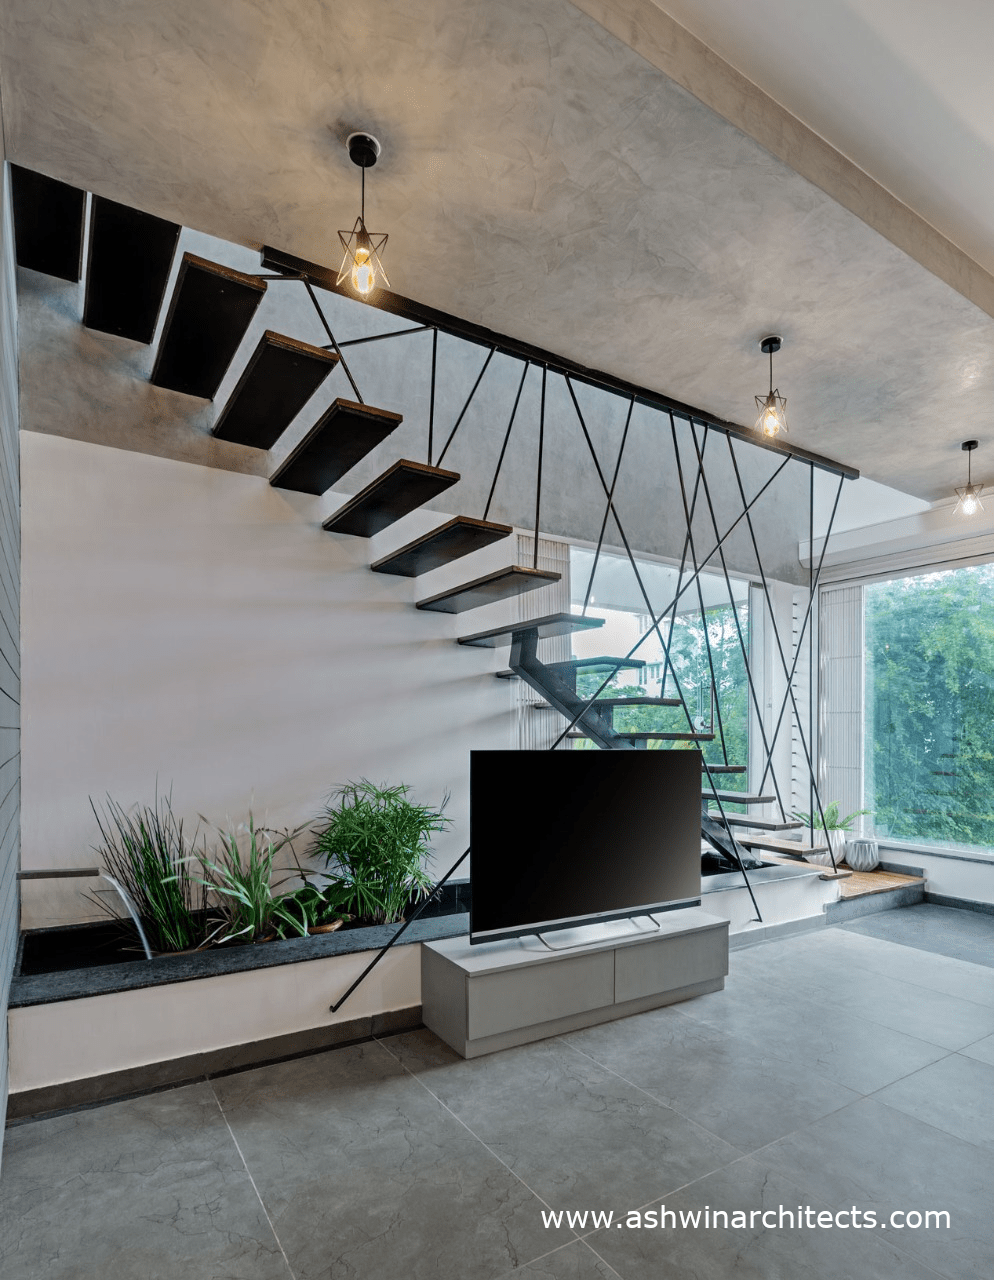 pawans-30-50-house-design-residential-architects-in-bangalore-living-room-stairs-tv